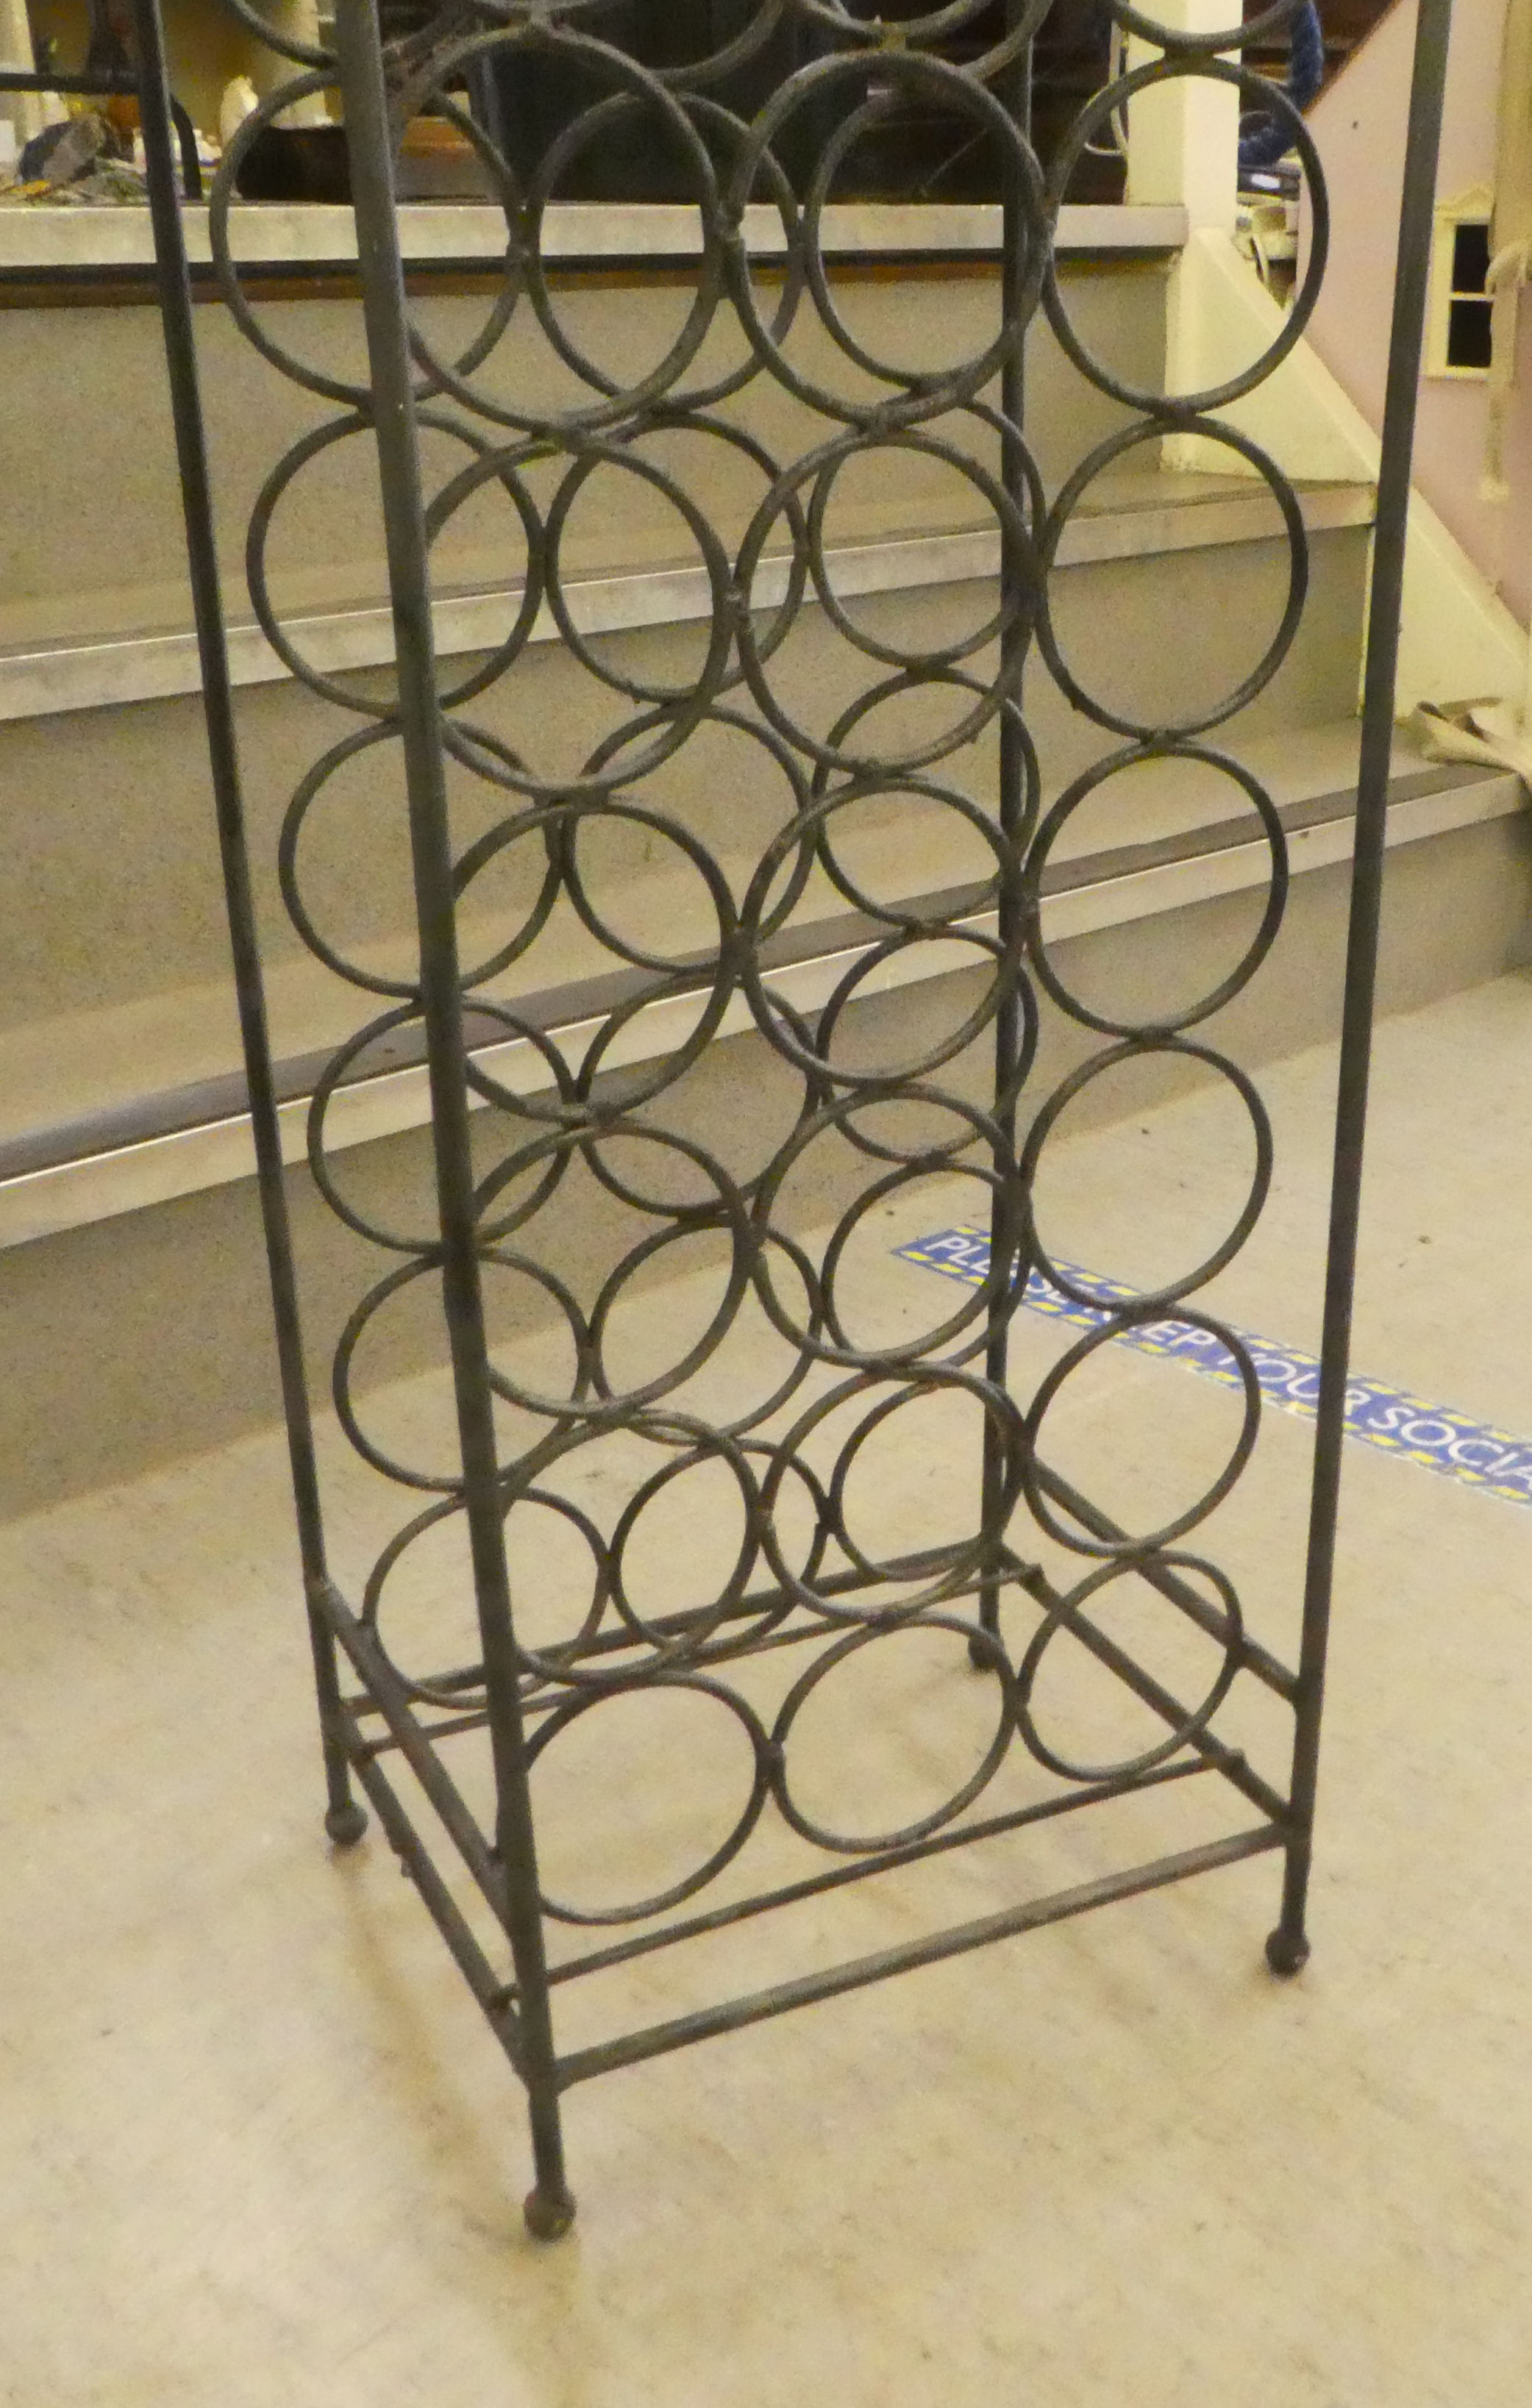 A wrought iron freestanding wine rack, accommodating 39 bottles  59"h  13"w - Image 2 of 3